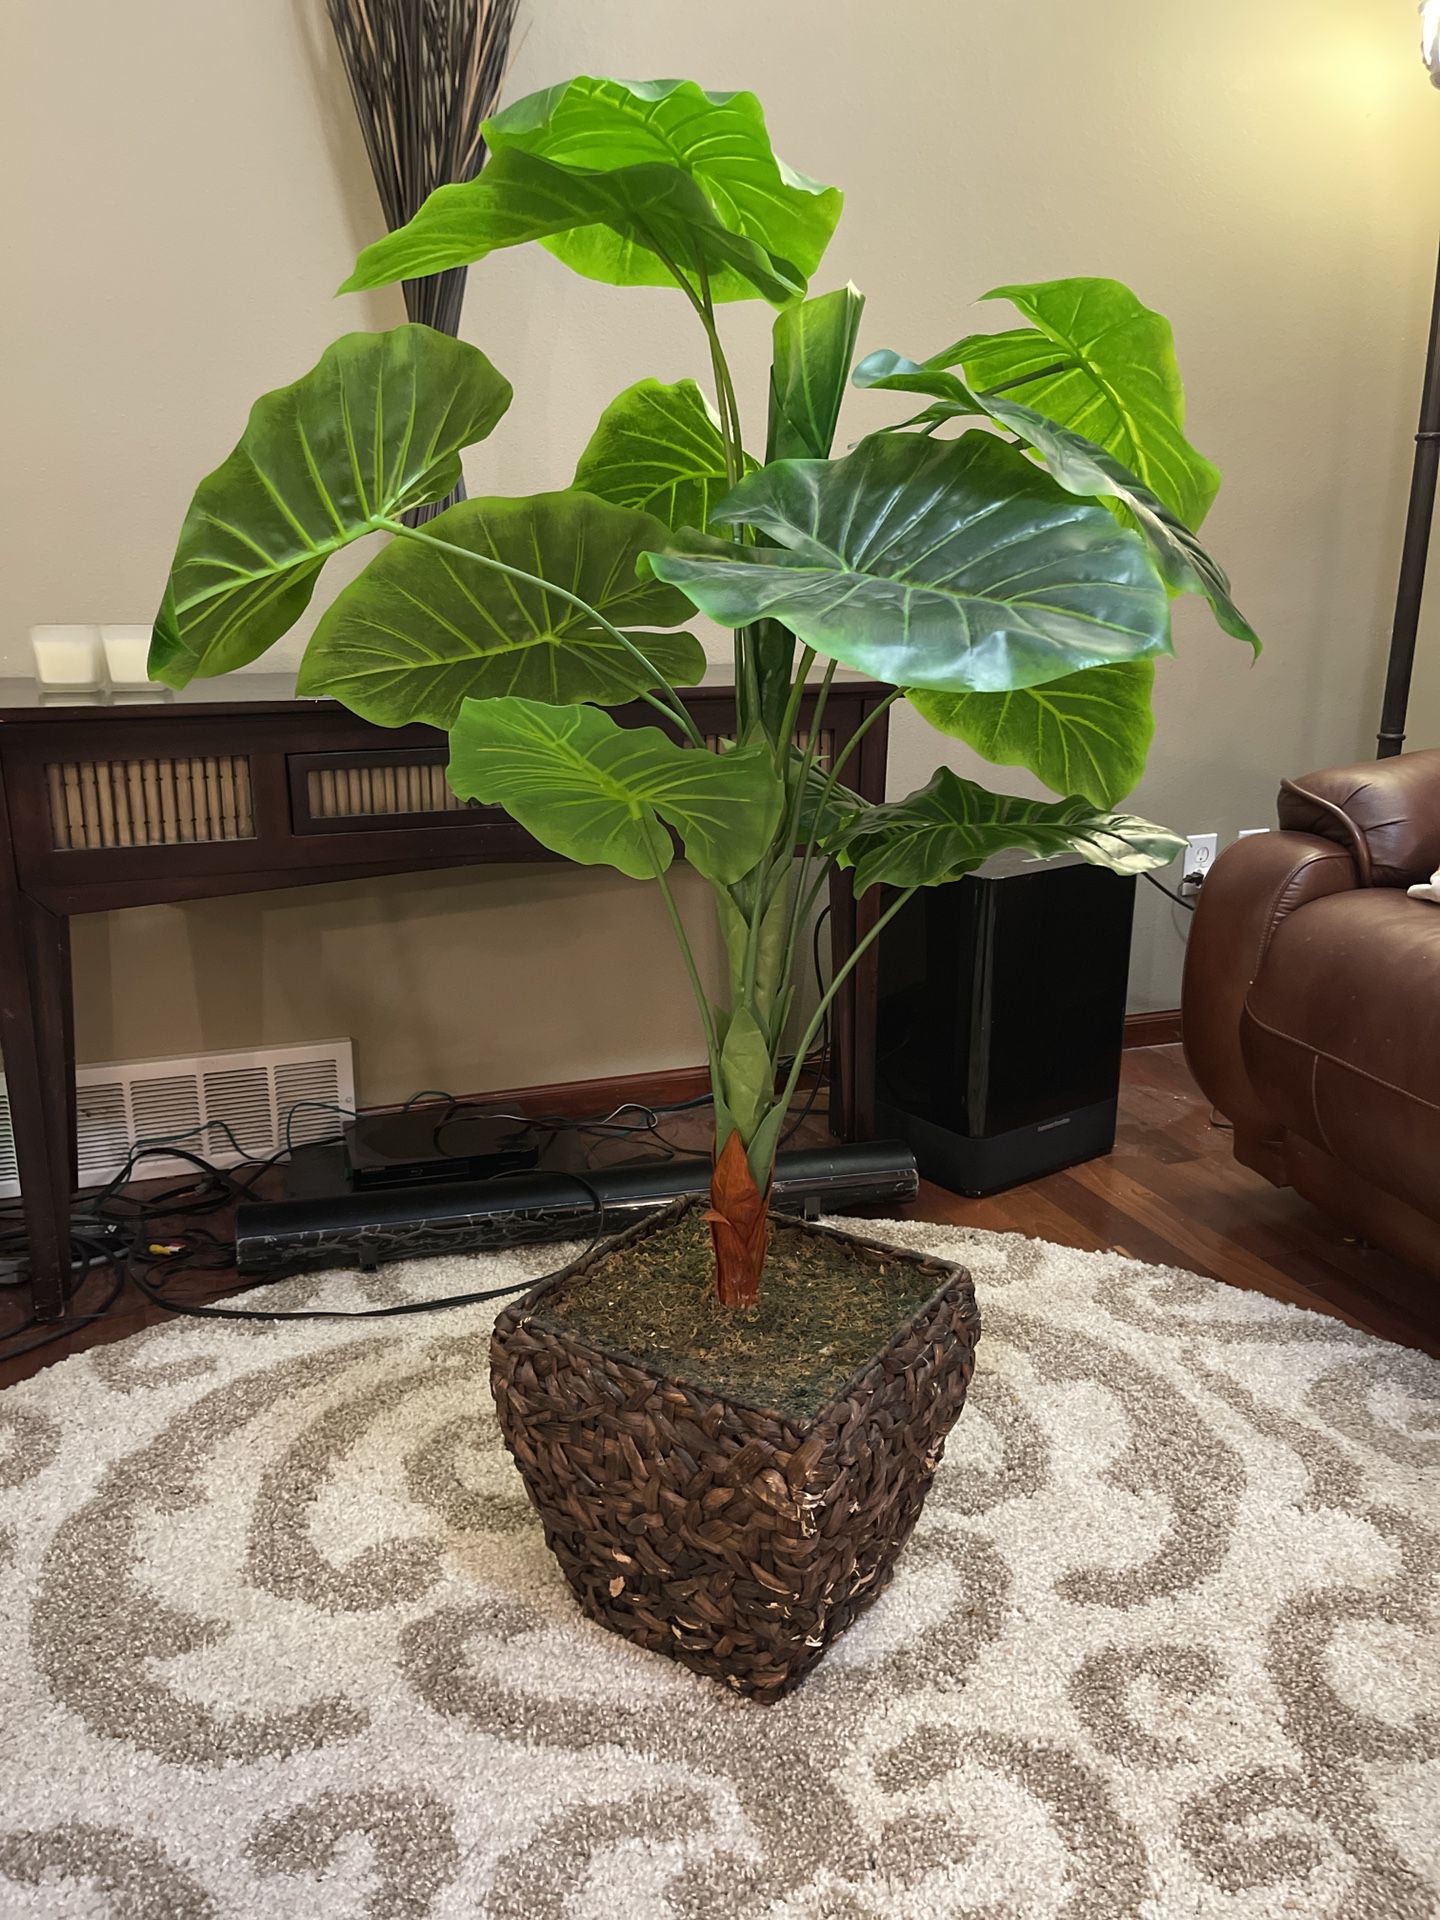 Decorative Fake House Plant - about 45” tall